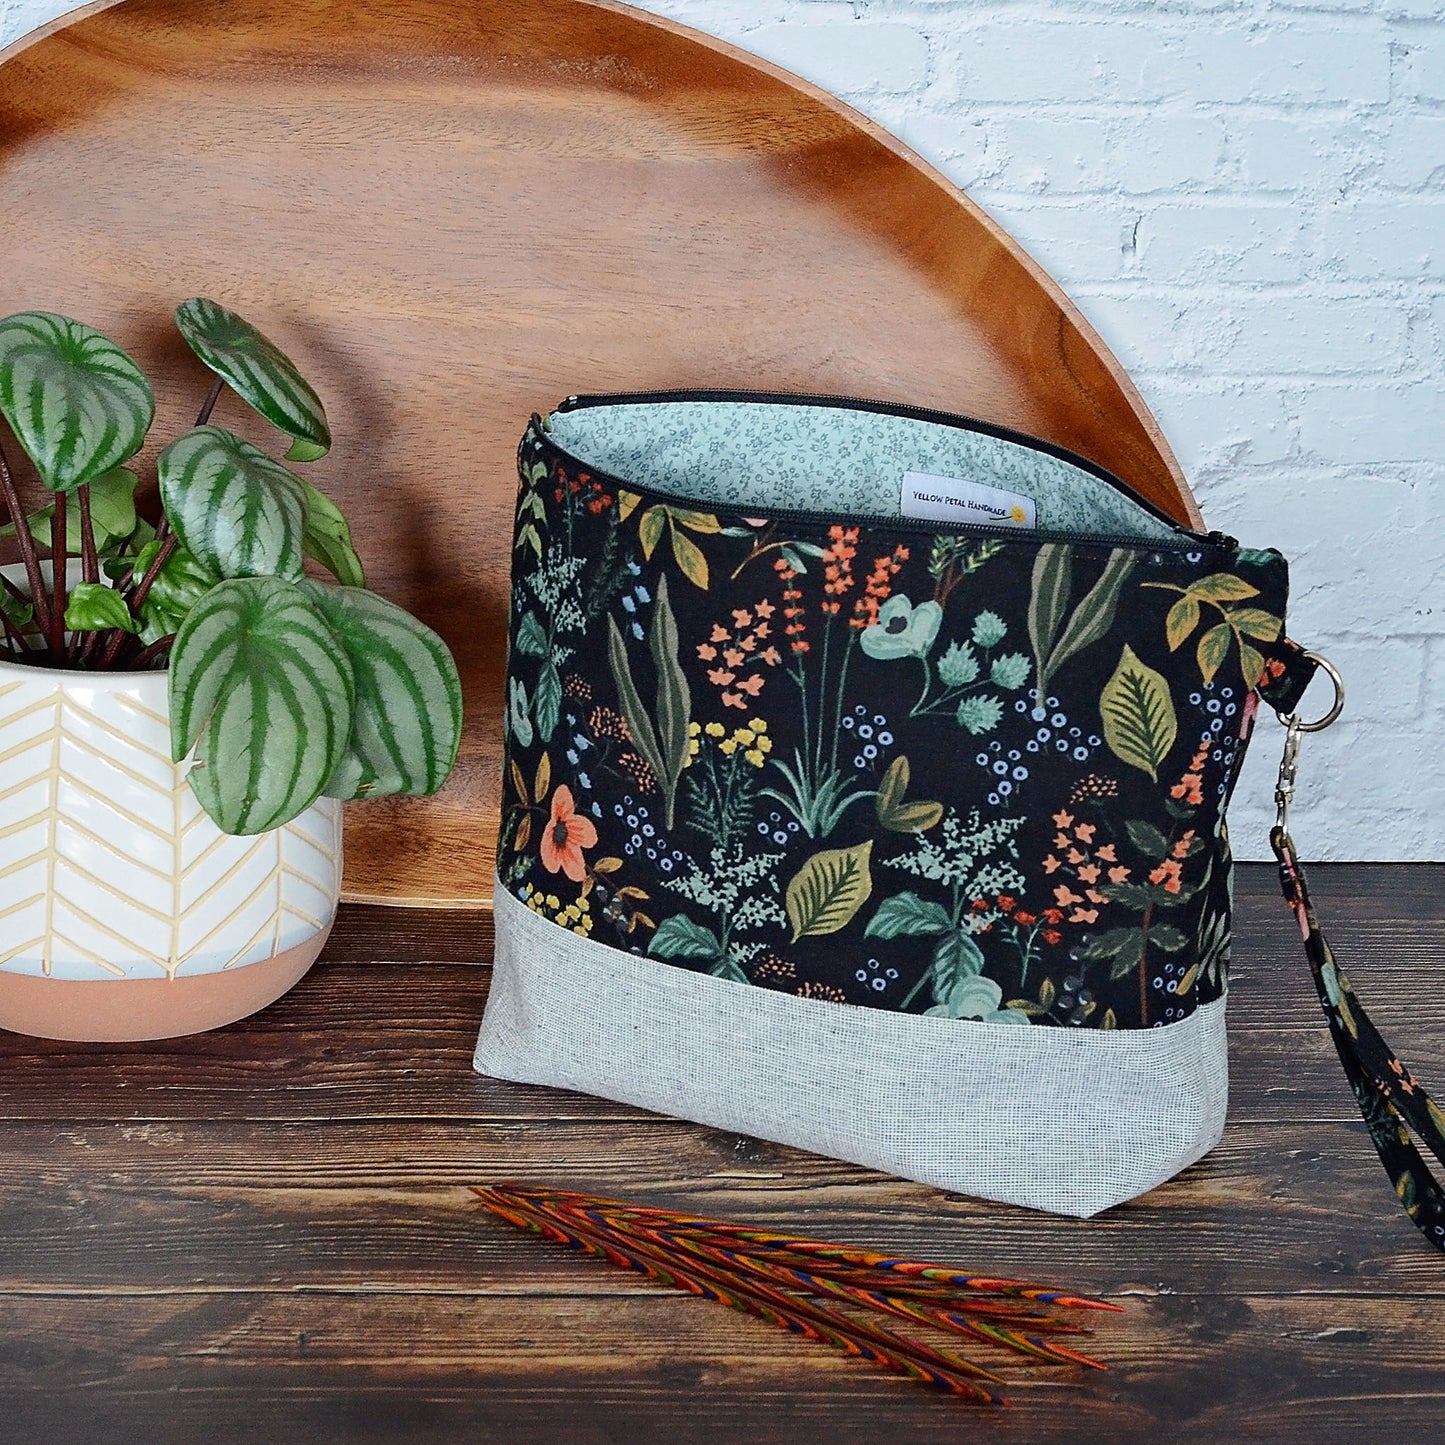 Zippered Project Bag or Pouch in Rifle Paper Co Fabric